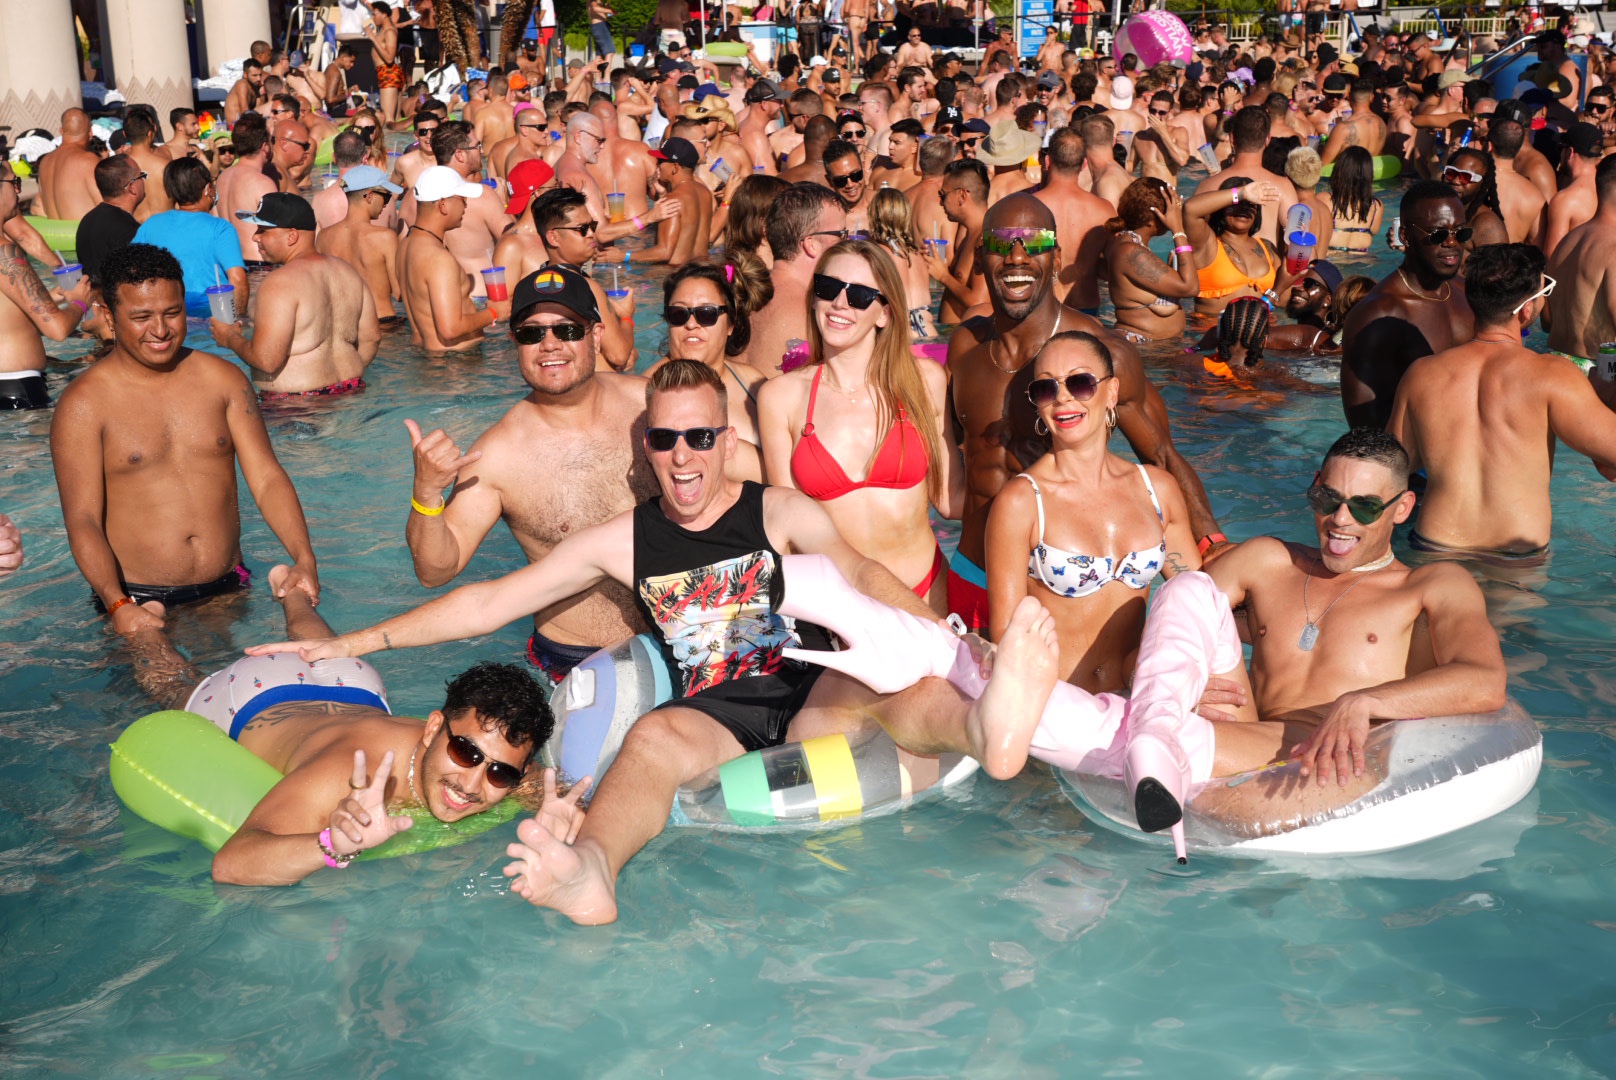 NEW LOCATION IN THE WORKS: Vegas Gay Pool Party